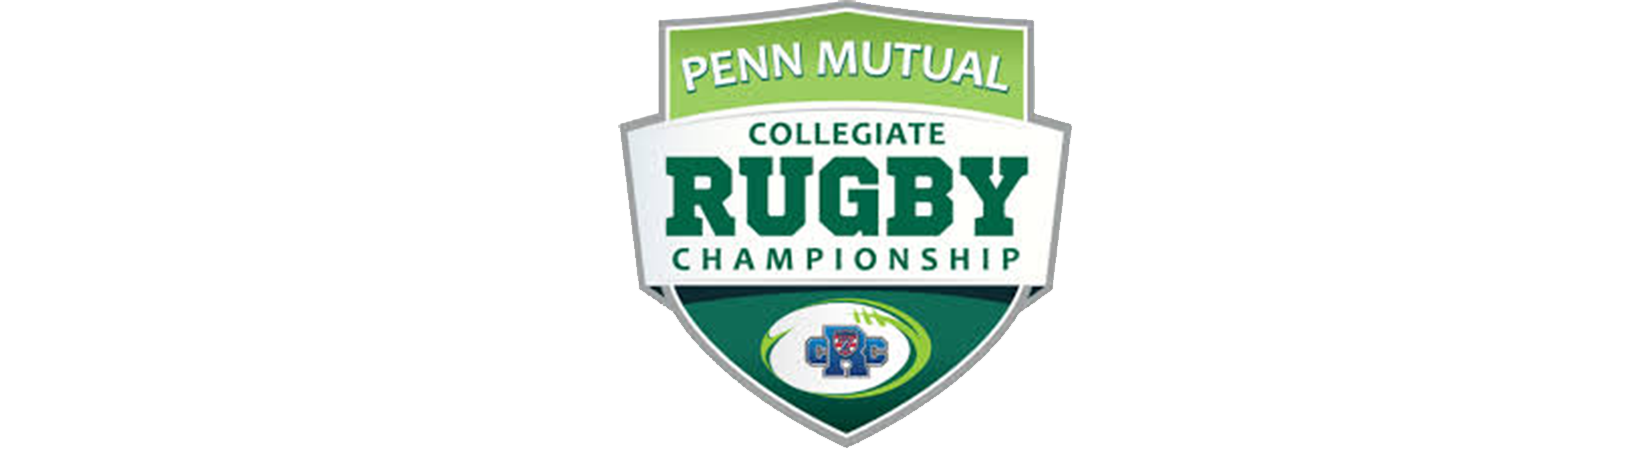 Penn Mutual Collegiate Rugby – The Million Group